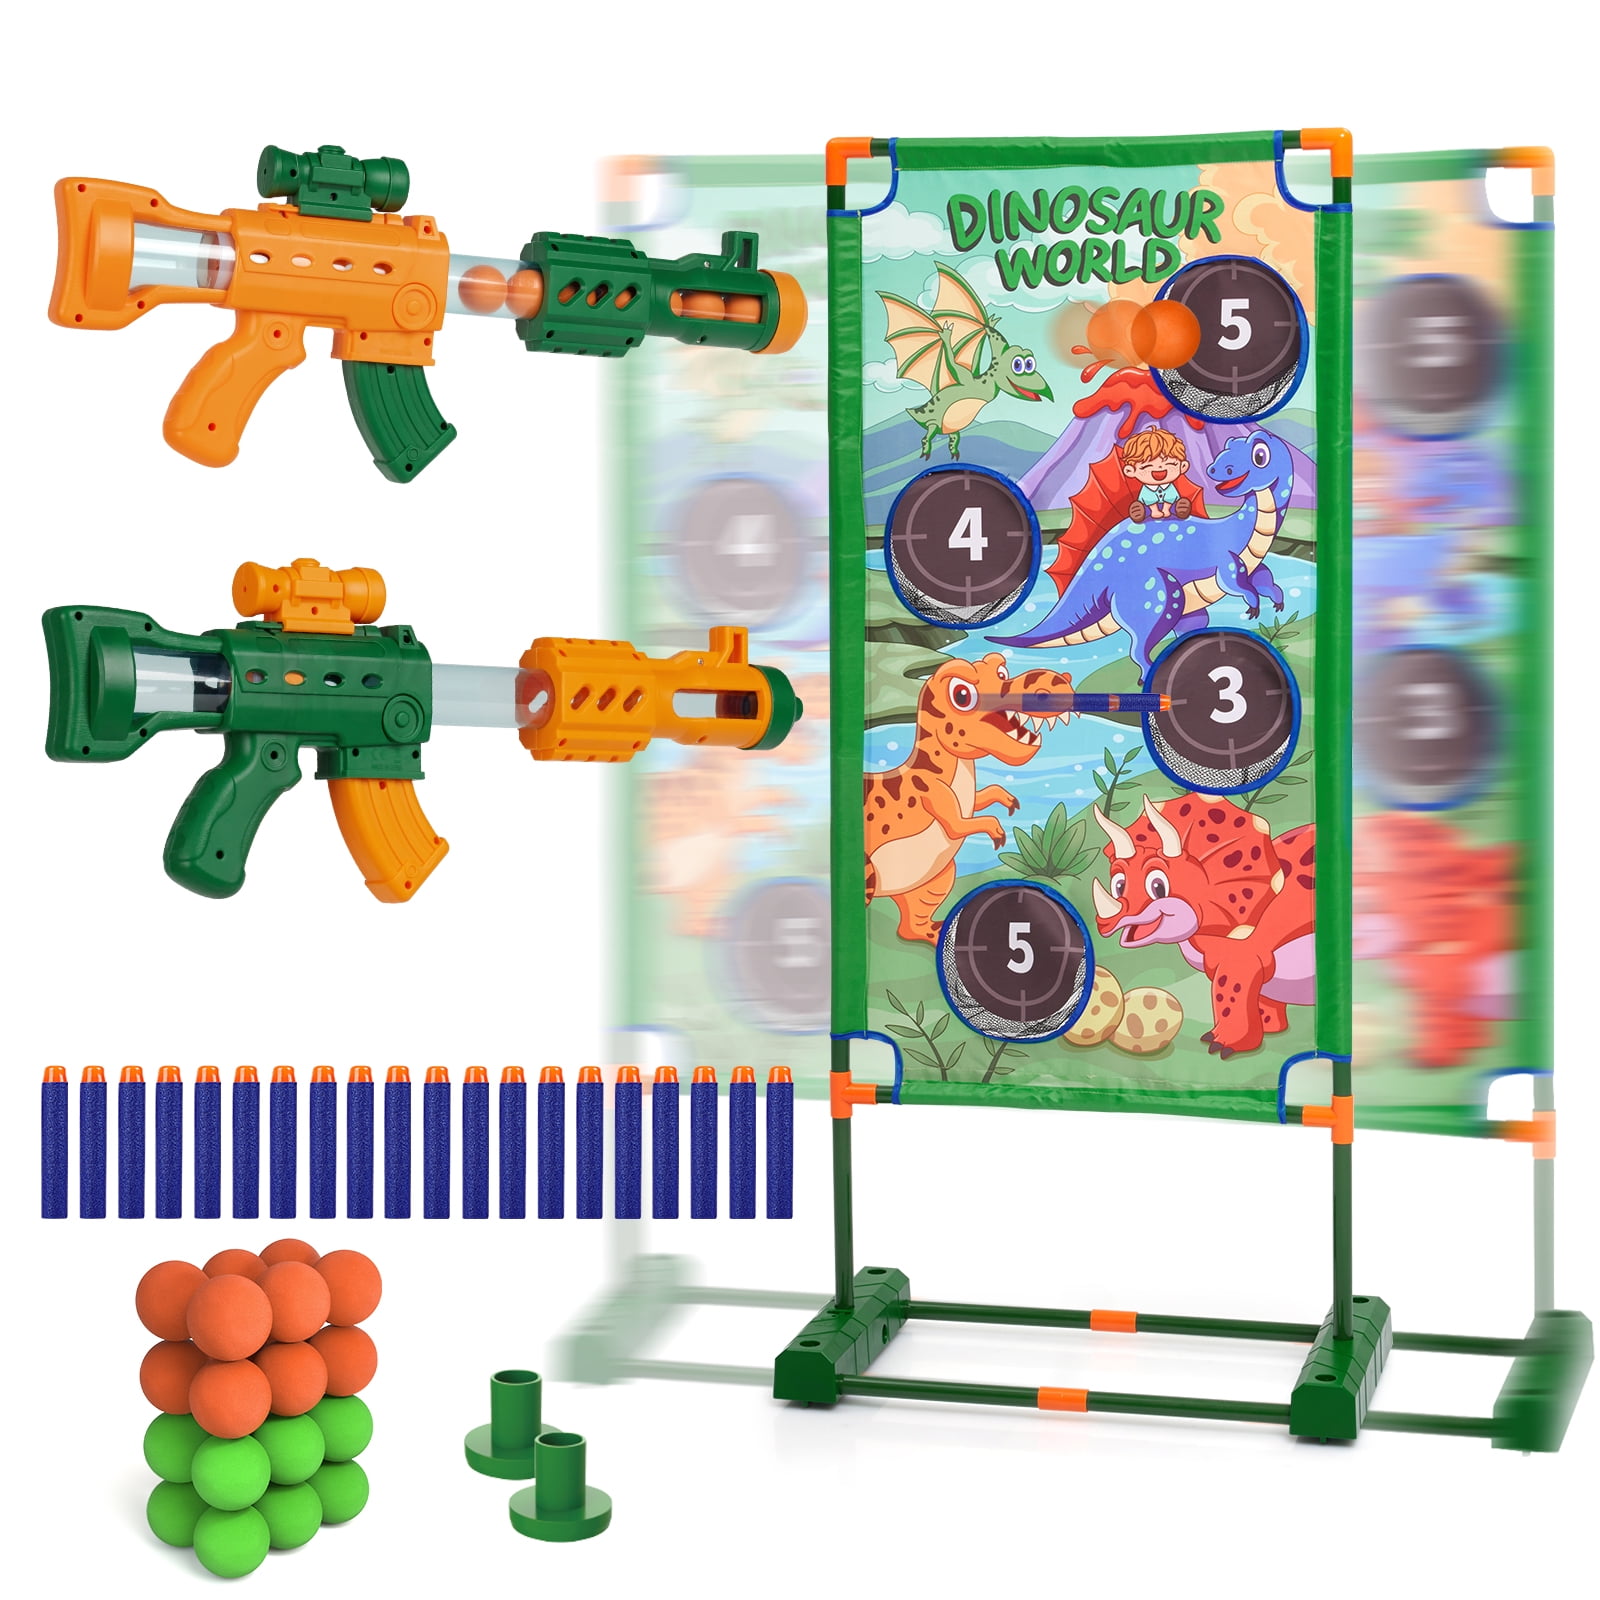 Kidlove Moving Shooting Games for Kids, Dinosaur Target Game Toys, 2PK Gun Toys with Foam Bullets for Toddlers